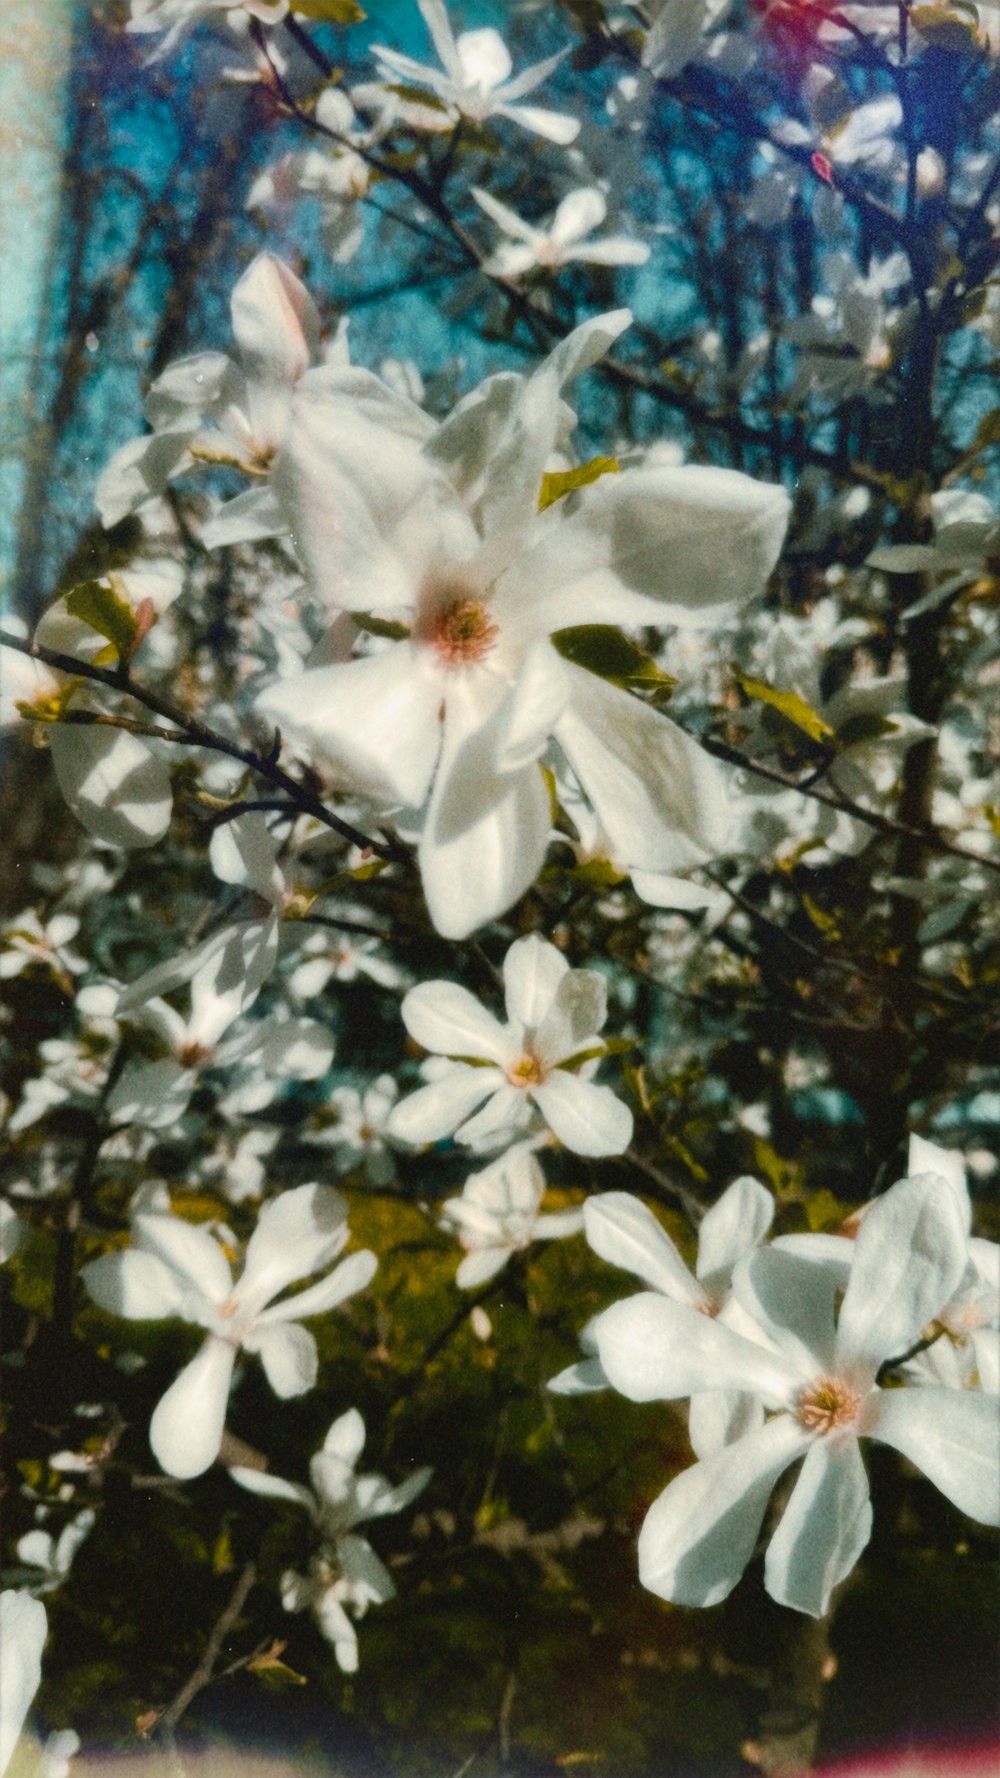 a bunch of white flowers that are on a tree